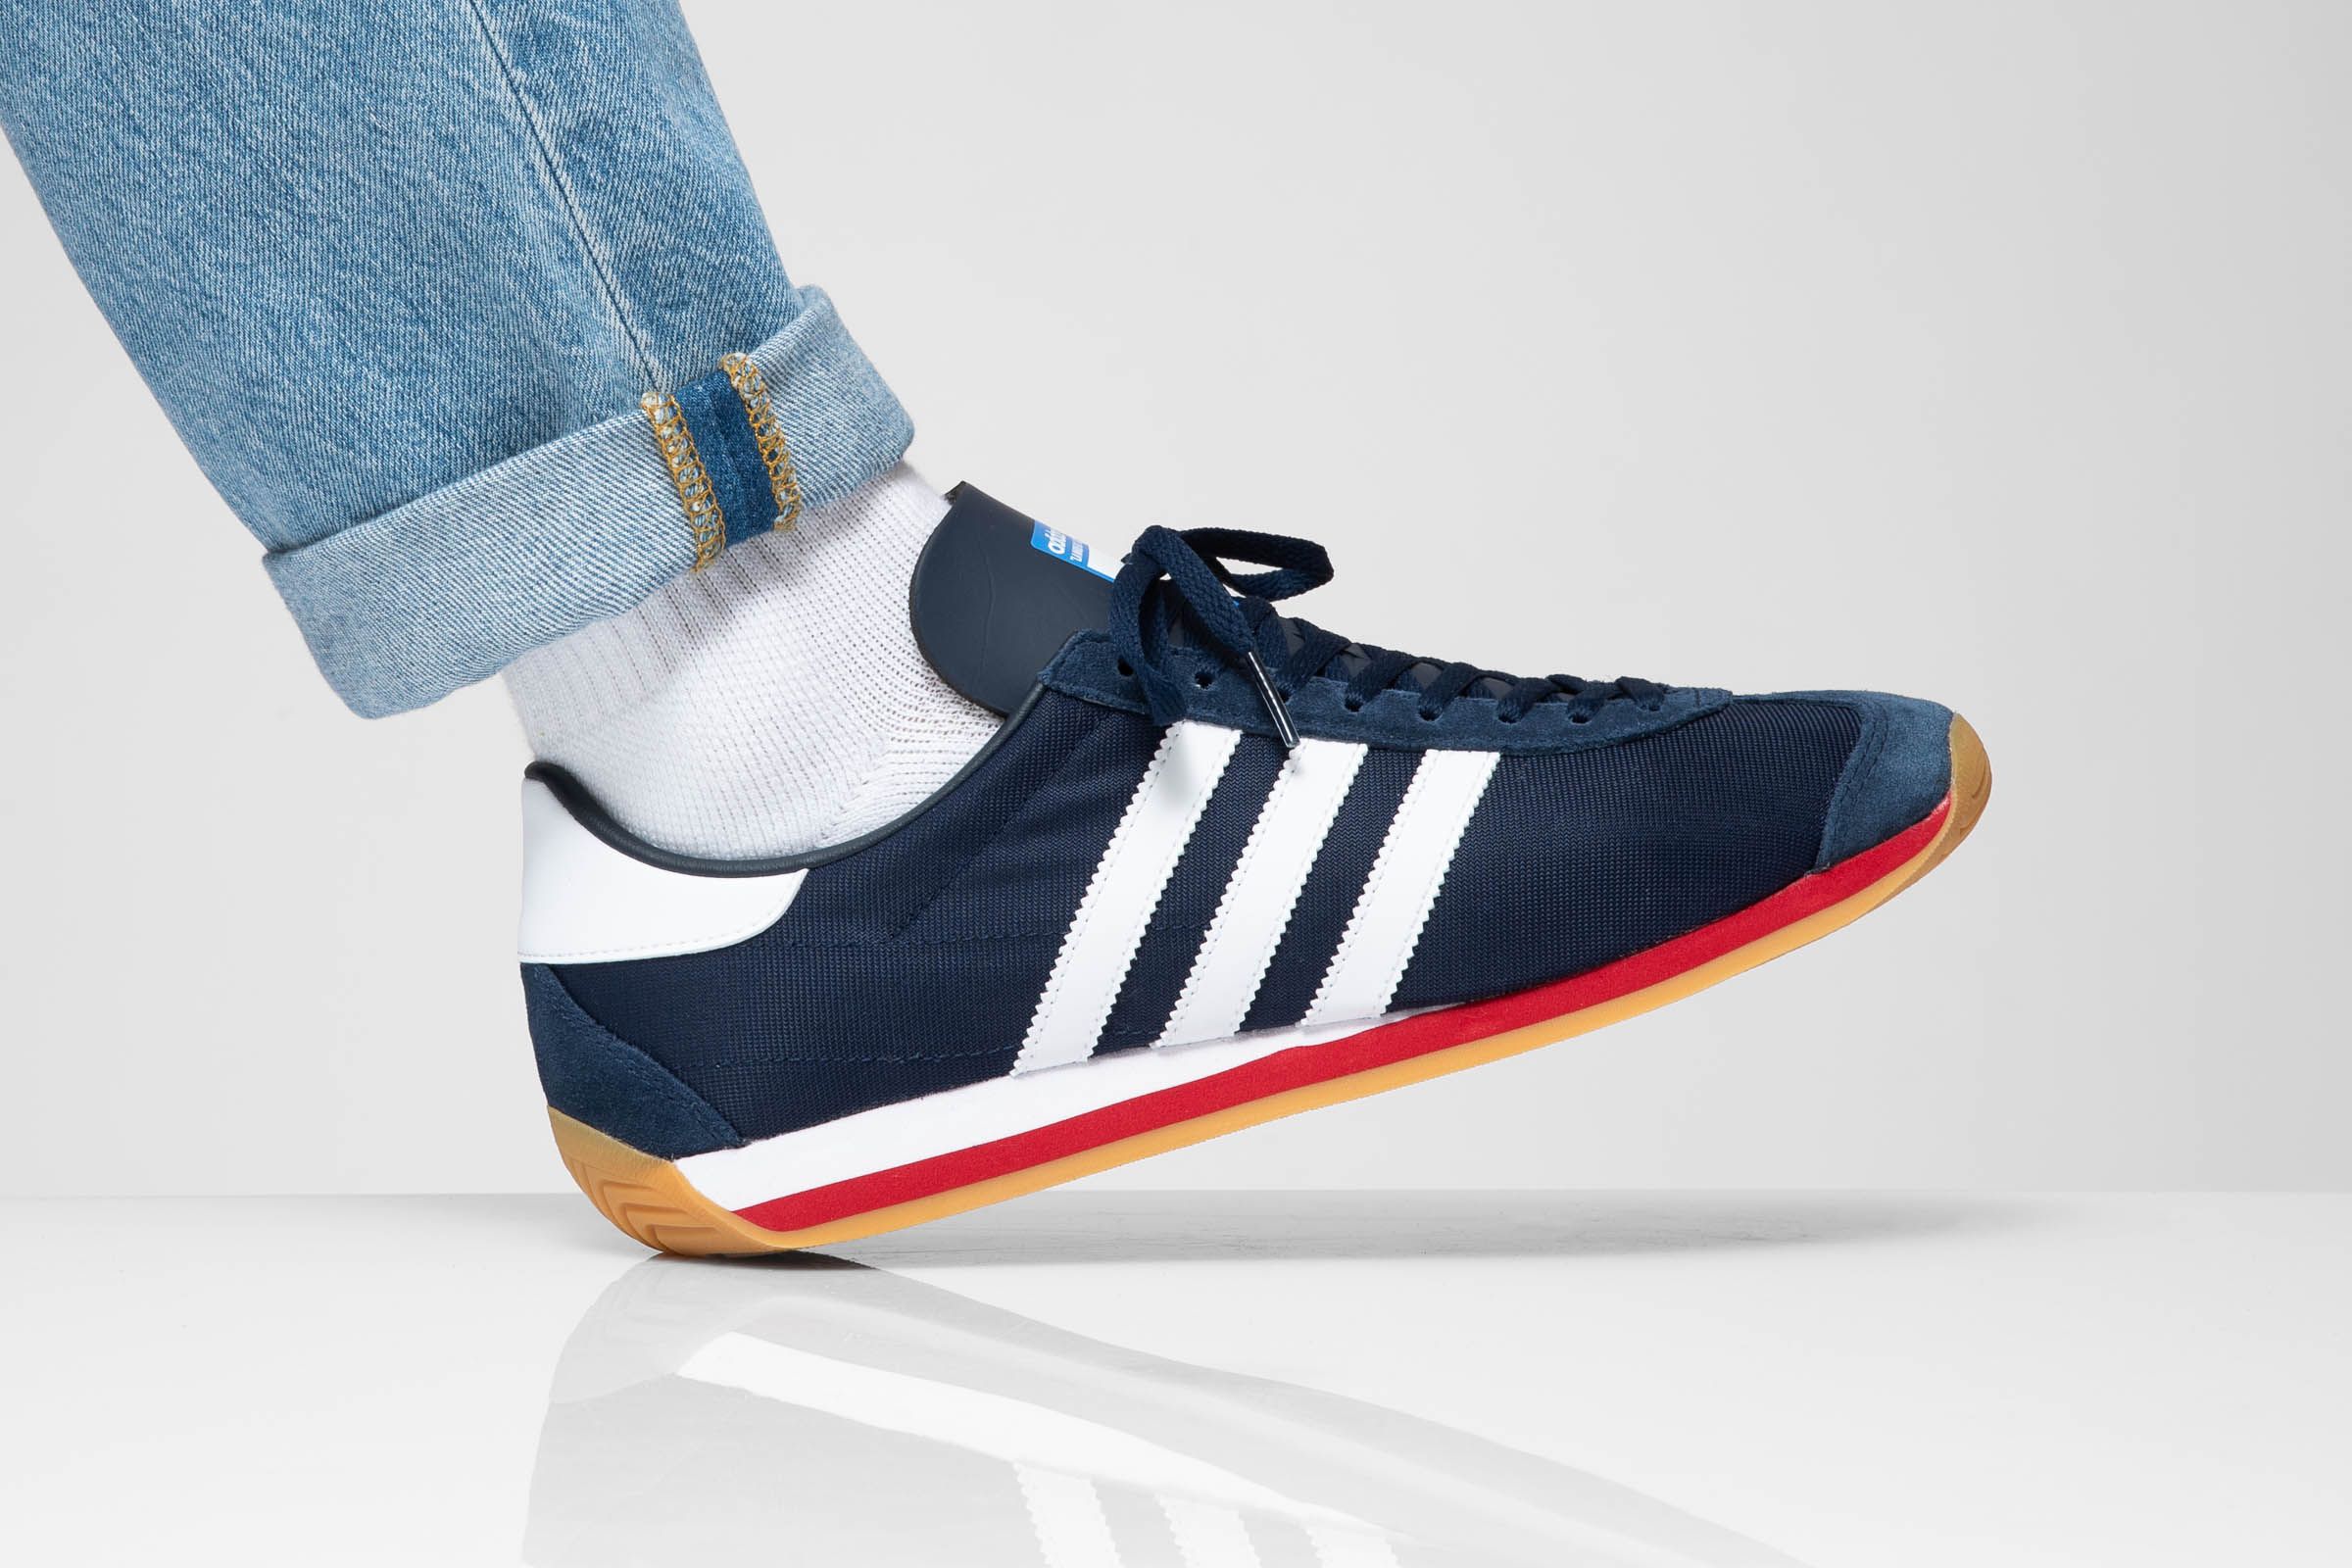 Titolo on Twitter: "NEW 🔵🔴 Adidas Country OG "Navy/Scarlet" LINK ➡️ https://t.co/DLiLl2n2XB UK 6.5 (40) - UK 10.5 (45 style code 🔎 EE5744 #adidas #adidascountry #country #retro https://t.co/UXbdrqk4LV" /